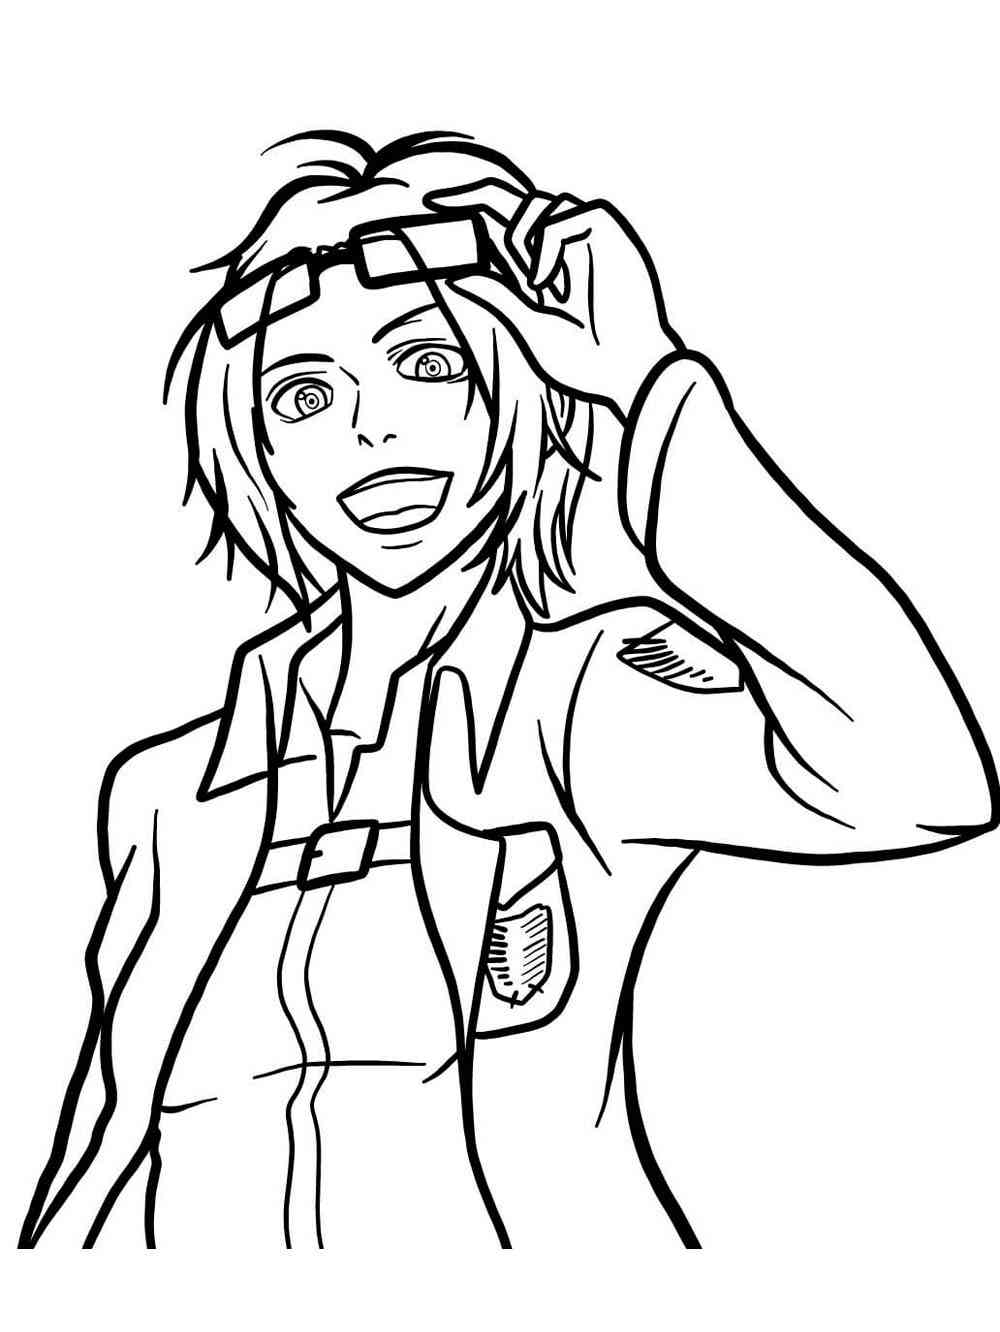 Hange Zoe from Attack On Titan coloring page